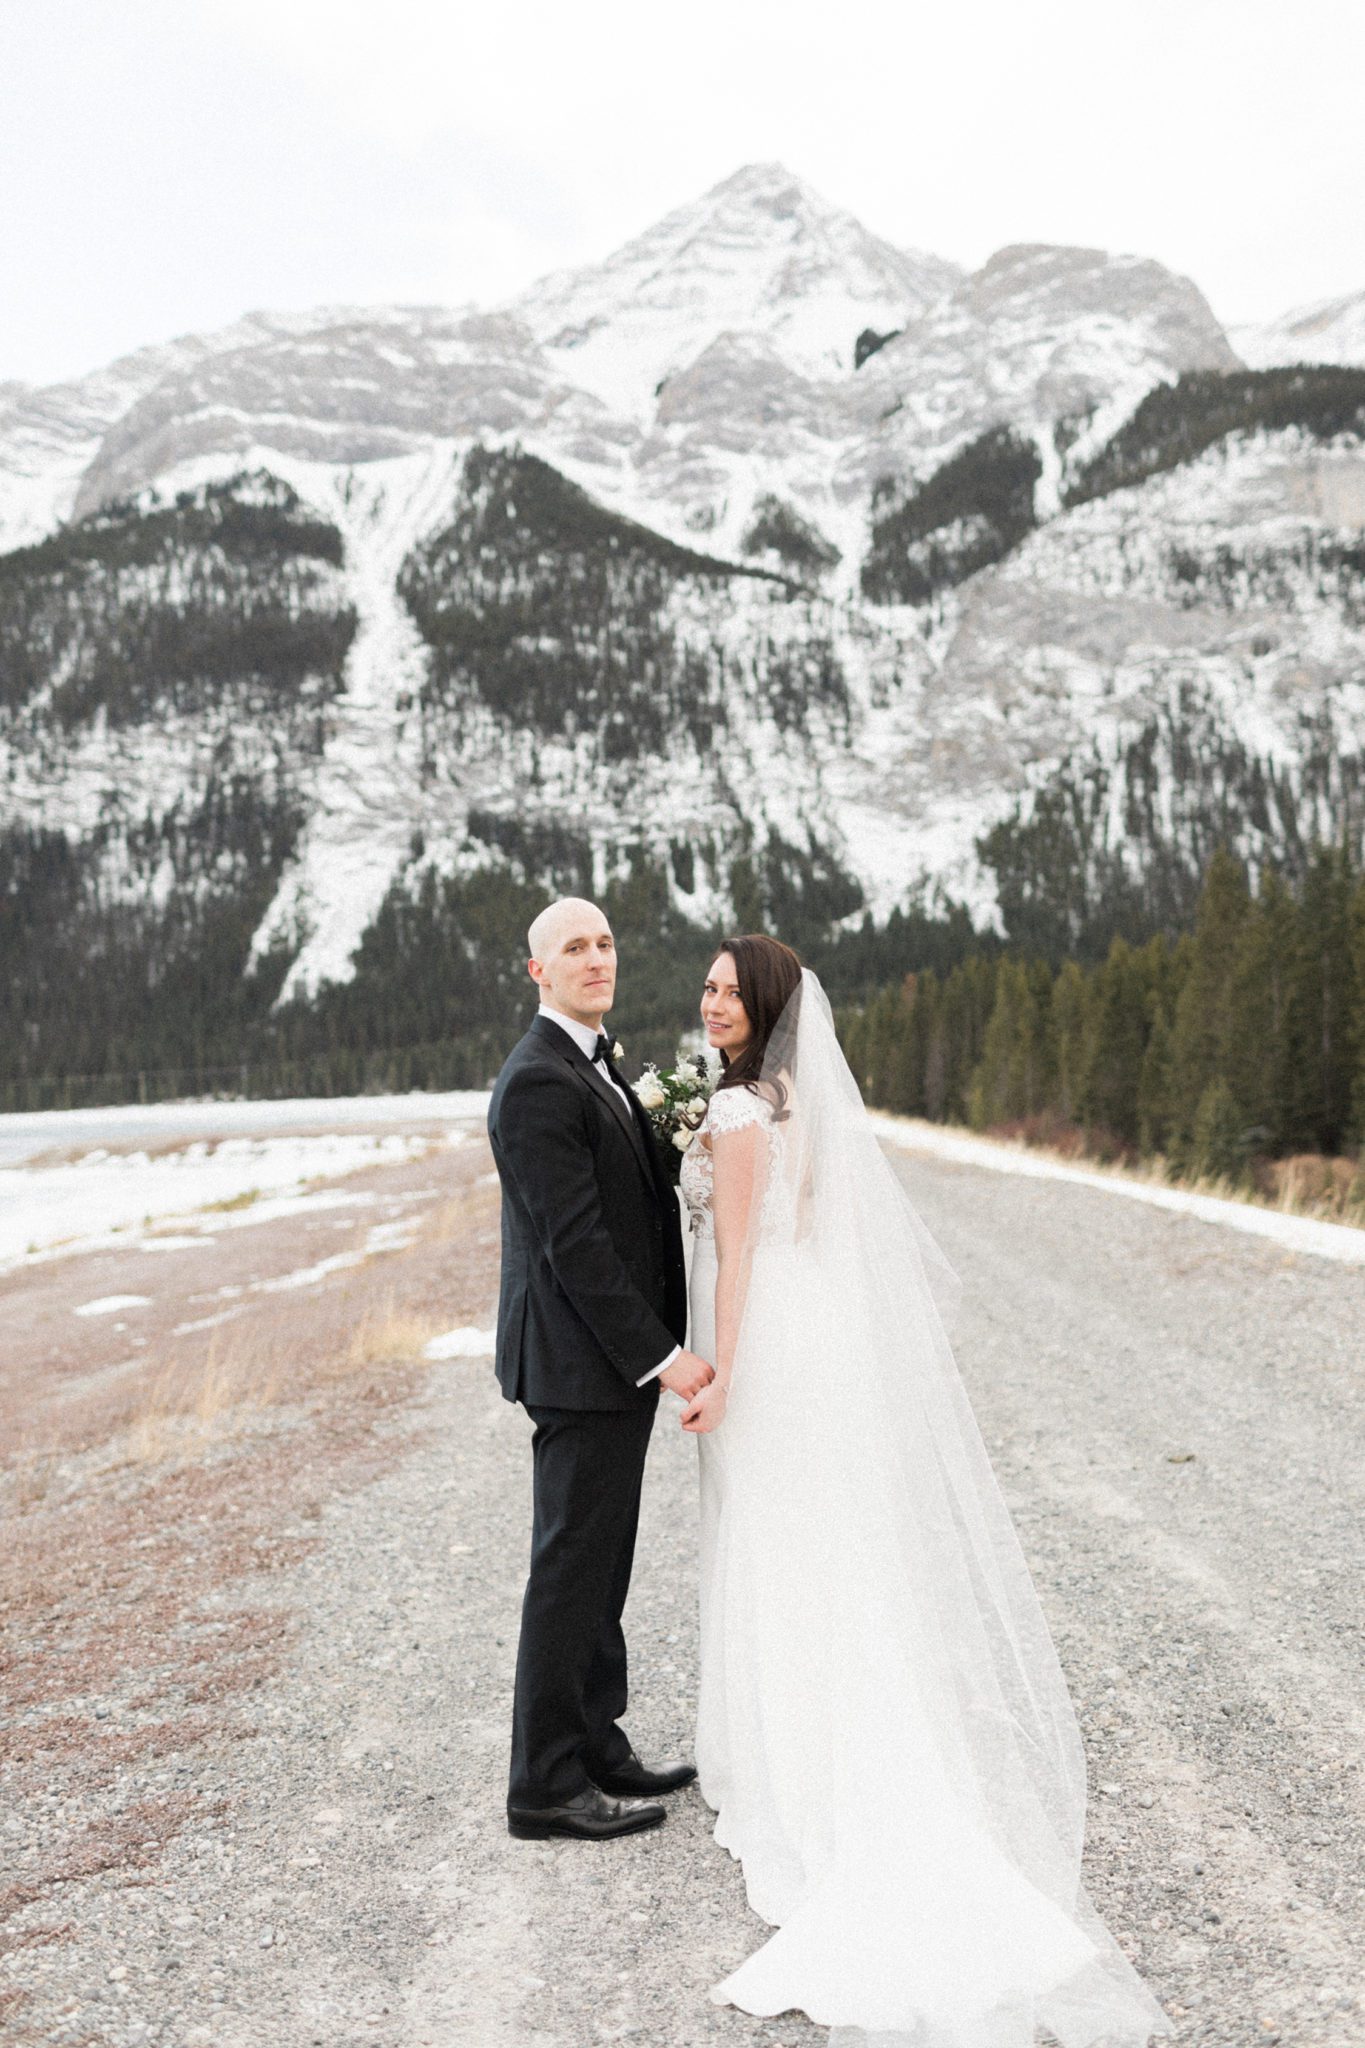 This Monochromatic Calgary Minimony Ends With Sunset Portraits in the Mountains Featured by Brontë Bride